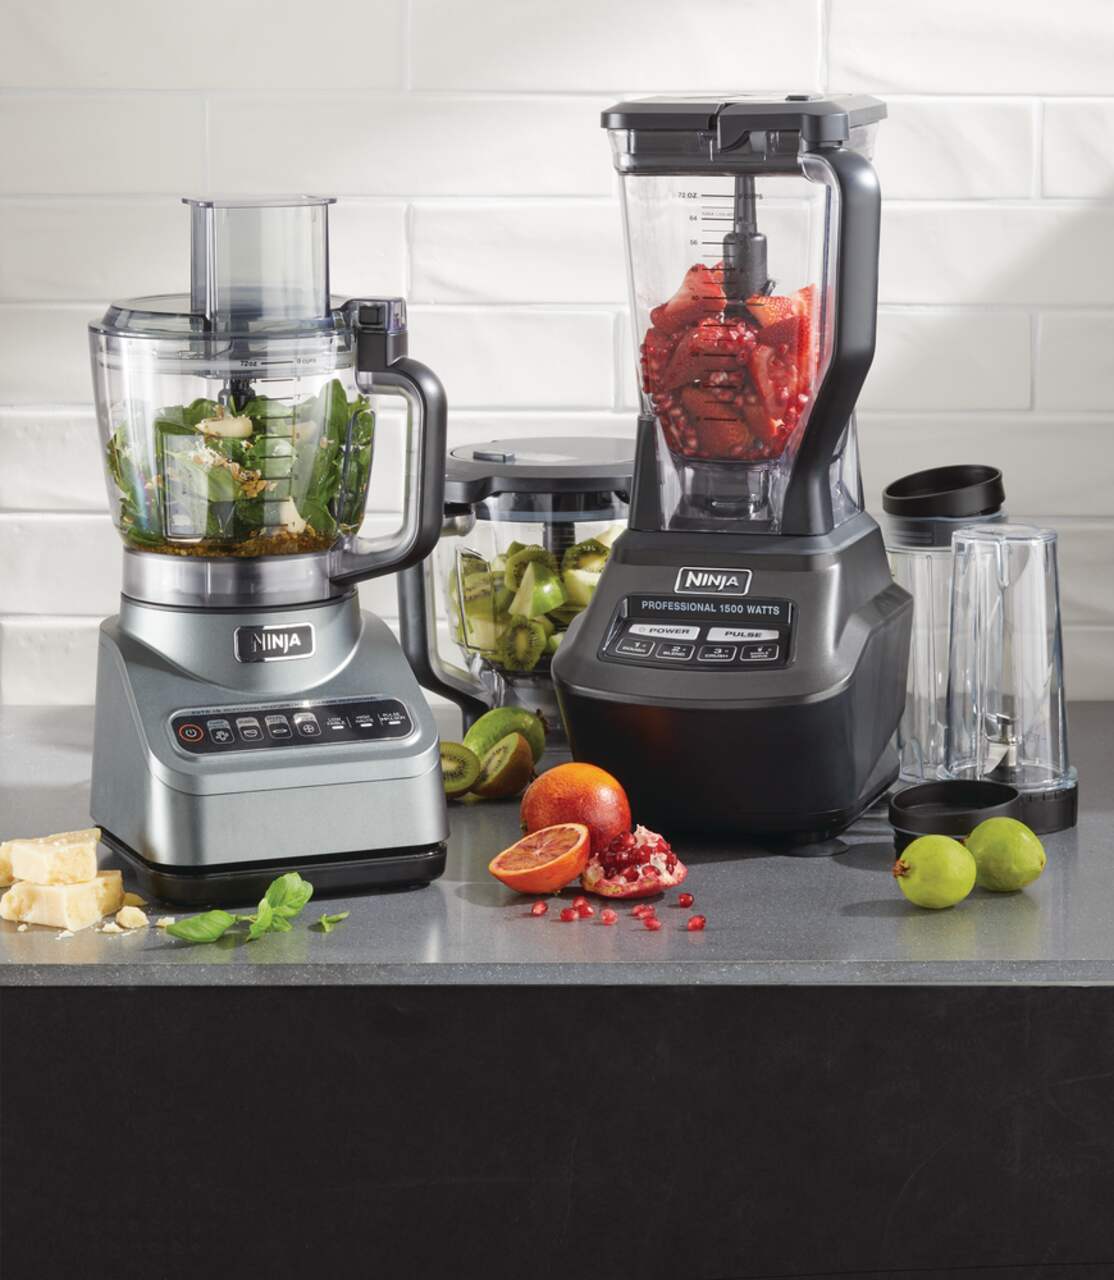 https://media-www.canadiantire.ca/product/living/kitchen/kitchen-appliances/0431268/ninja-mega-kitchen-system-c2b4161c-28d5-4844-a5fe-52053e2d9a84.png?imdensity=1&imwidth=1244&impolicy=mZoom